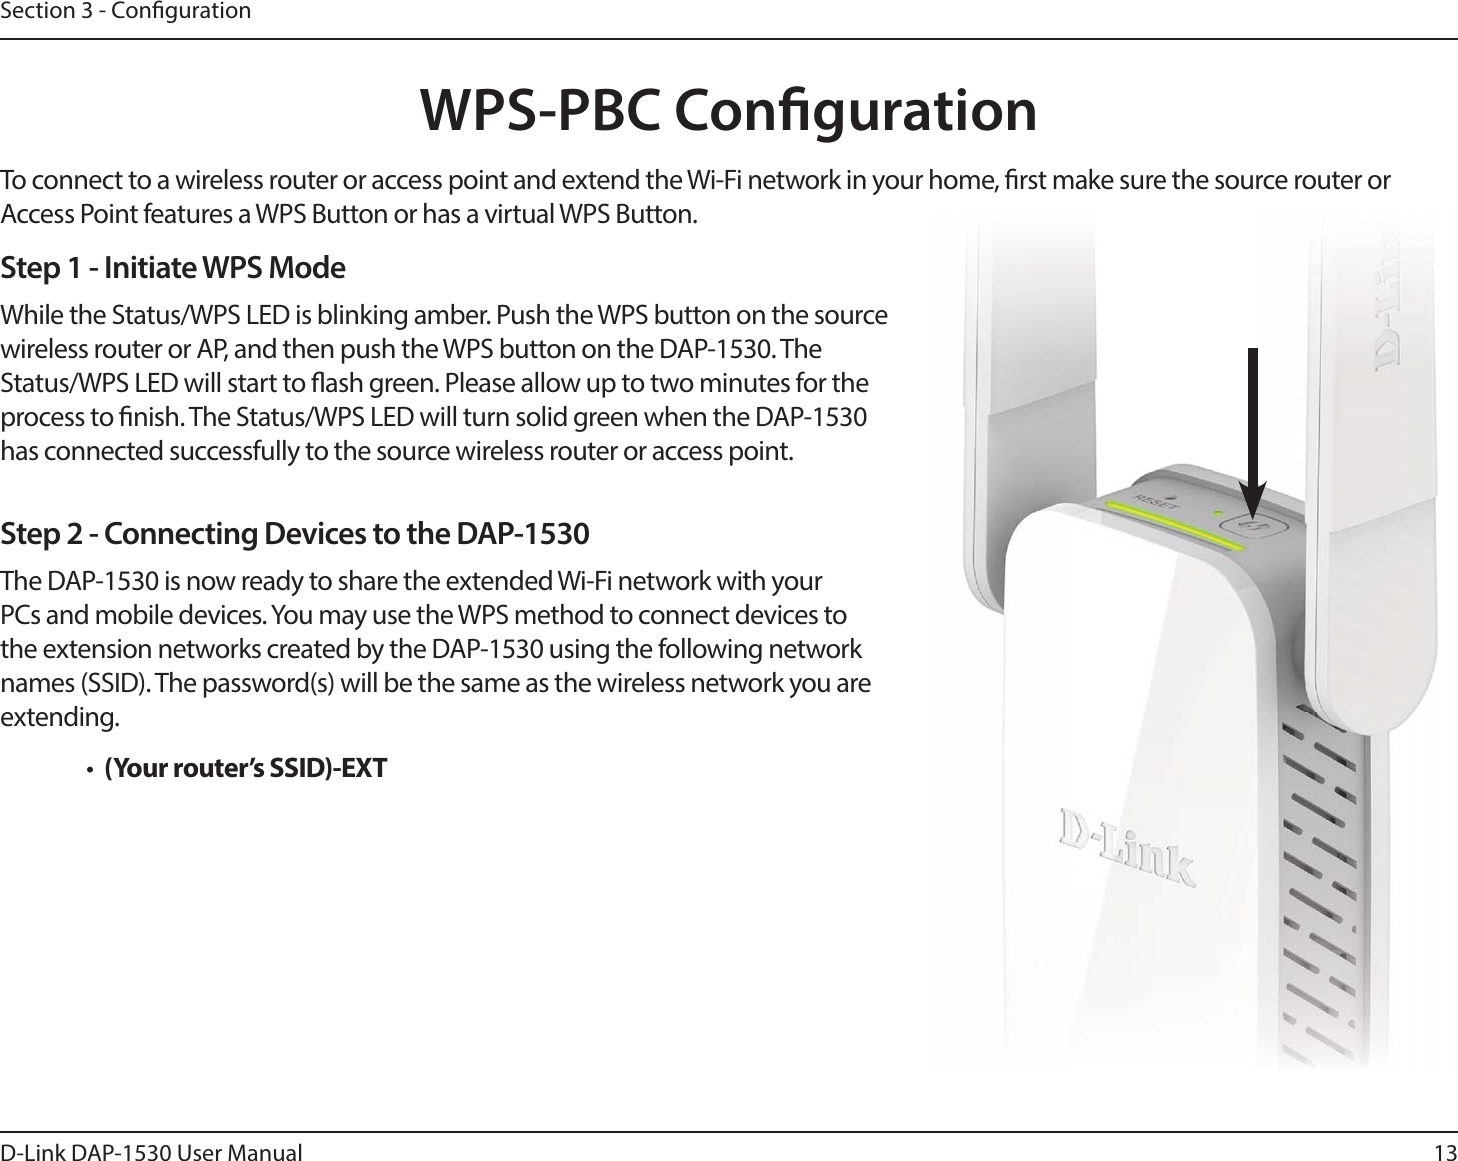 13D-Link DAP-1530 User ManualSection 3 - CongurationWPS-PBC CongurationStep 1 - Initiate WPS ModeWhile the Status/WPS LED is blinking amber. Push the WPS button on the source wireless router or AP, and then push the WPS button on the DAP-1530. The Status/WPS LED will start to ash green. Please allow up to two minutes for the process to nish. The Status/WPS LED will turn solid green when the DAP-1530 has connected successfully to the source wireless router or access point.Step 2 - Connecting Devices to the DAP-1530The DAP-1530 is now ready to share the extended Wi-Fi network with your PCs and mobile devices. You may use the WPS method to connect devices to the extension networks created by the DAP-1530 using the following network names (SSID). The password(s) will be the same as the wireless network you are extending.•  (Your router’s SSID)-EXTTo connect to a wireless router or access point and extend the Wi-Fi network in your home, rst make sure the source router or Access Point features a WPS Button or has a virtual WPS Button.